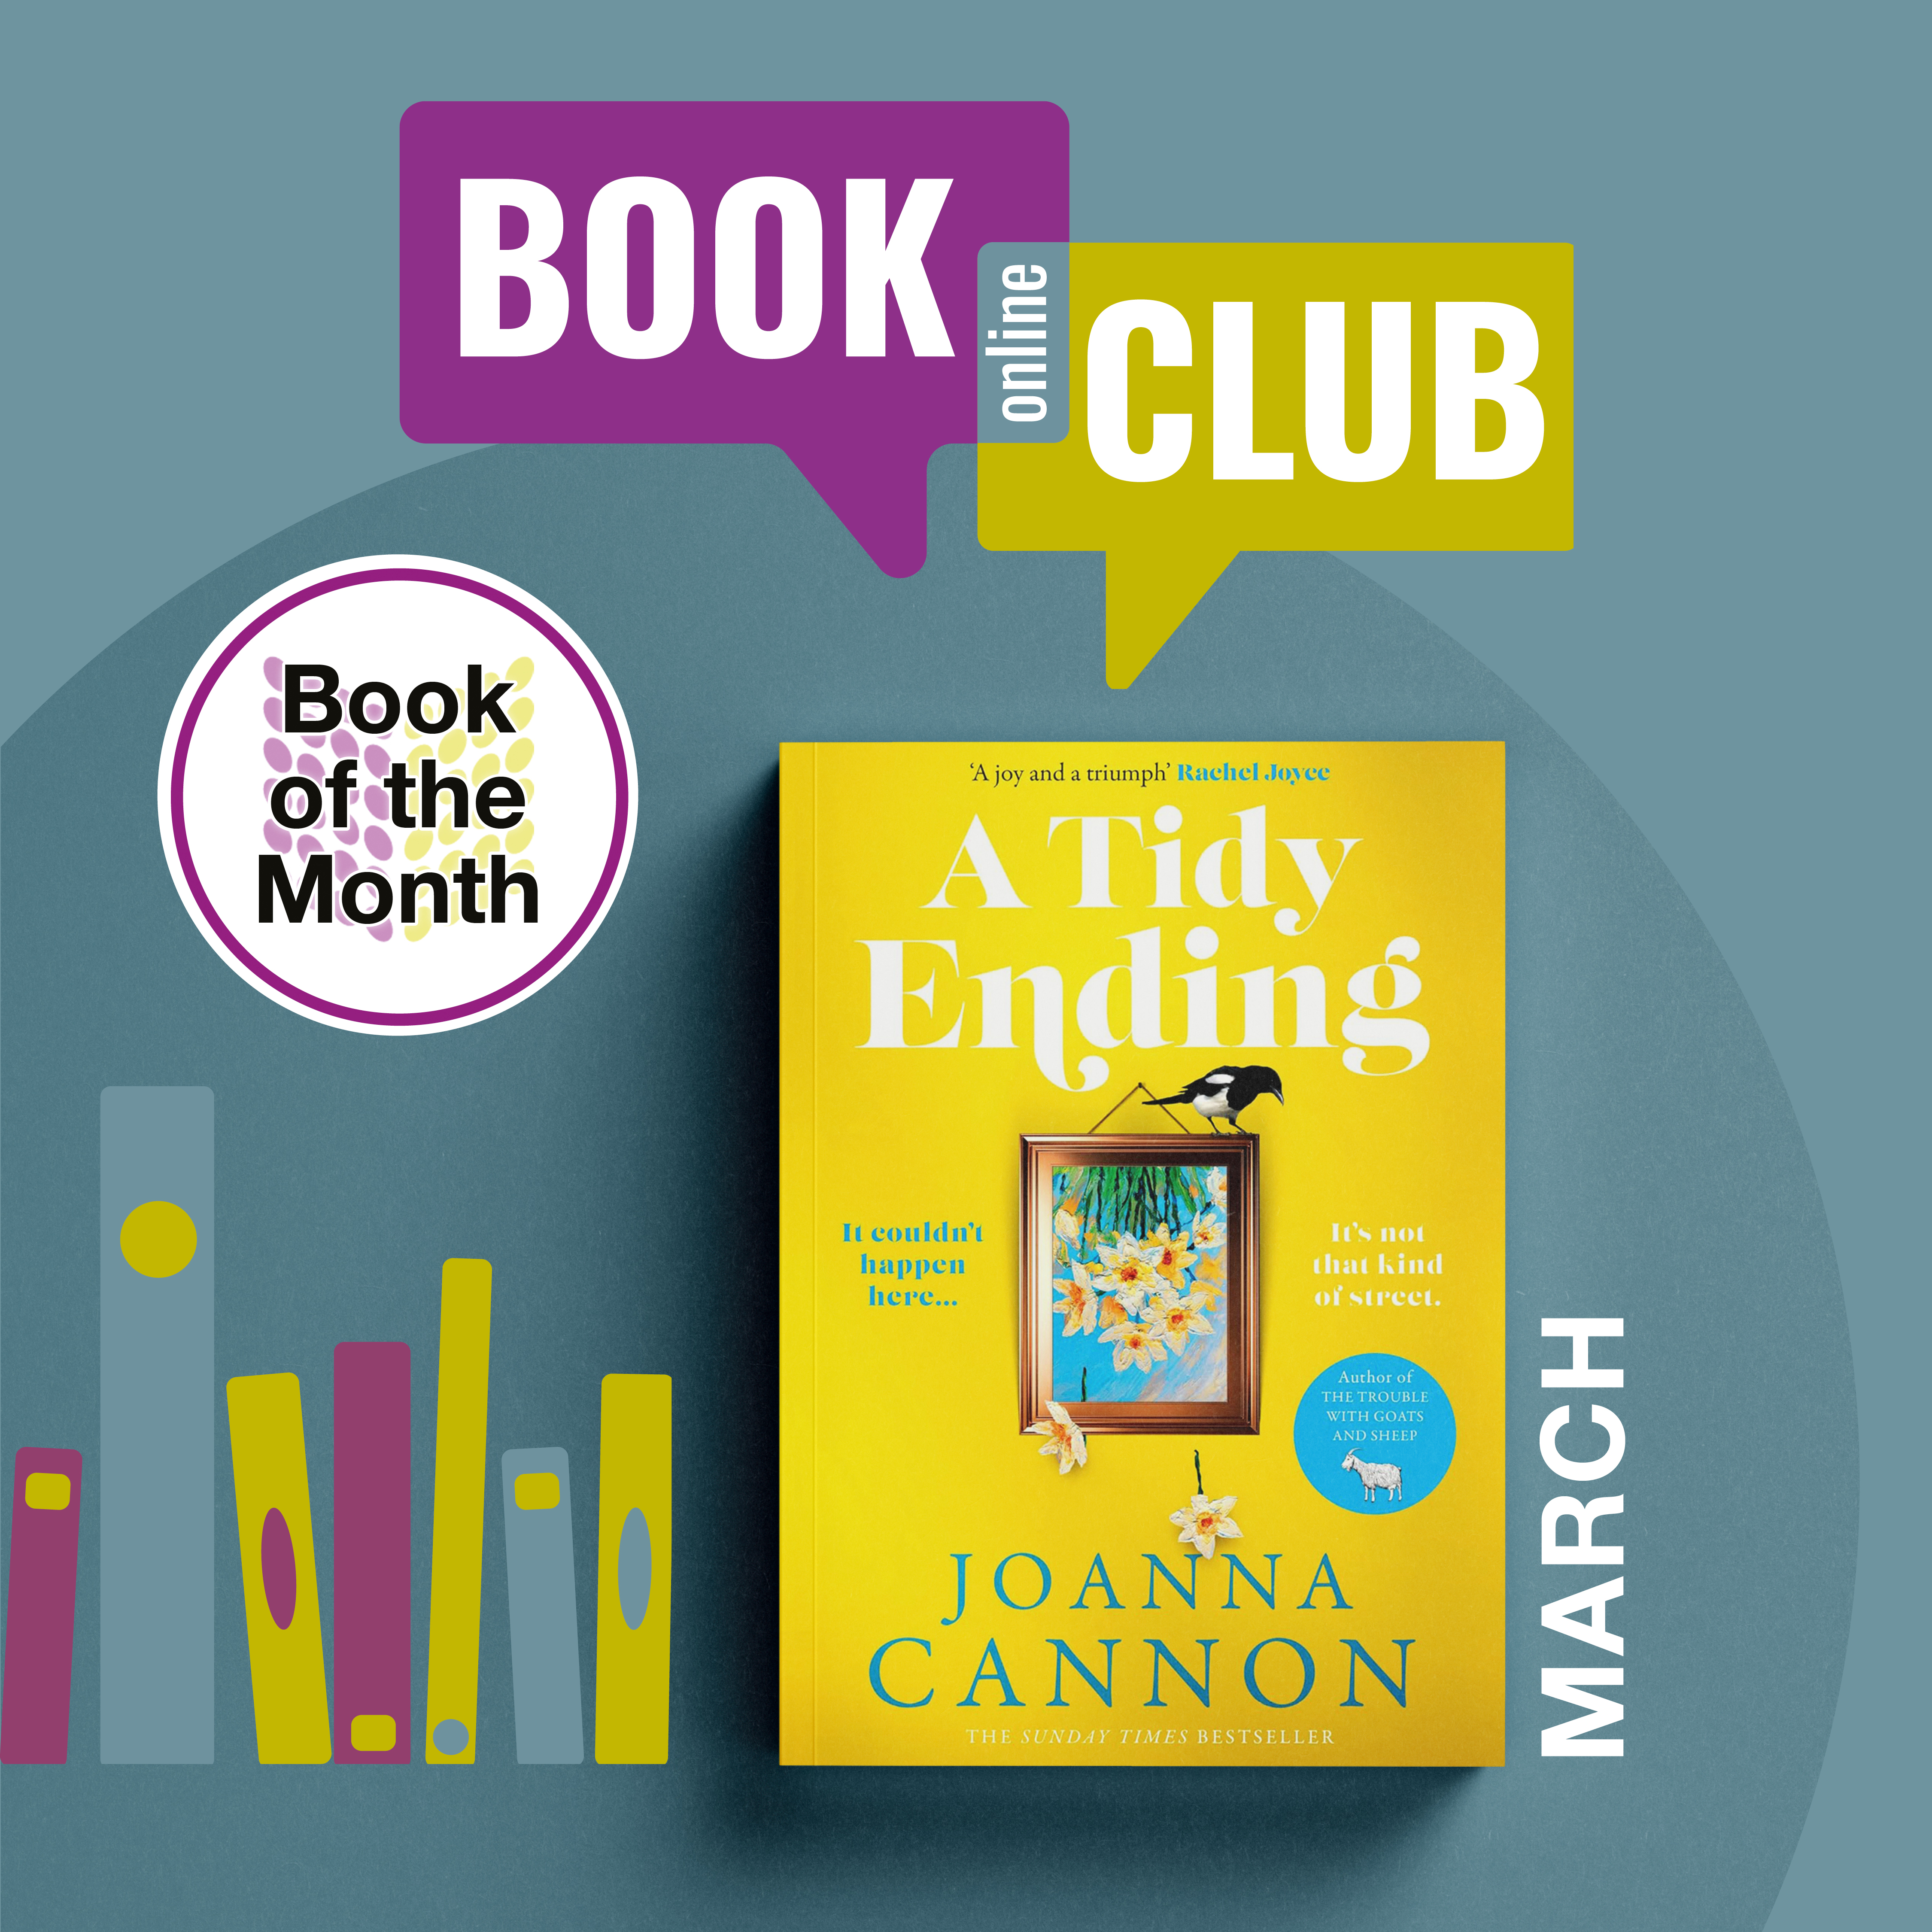 Join our Online Book Club on 28 March 2024, the title for discussion is A Tidy Ending by Joanna Cannon